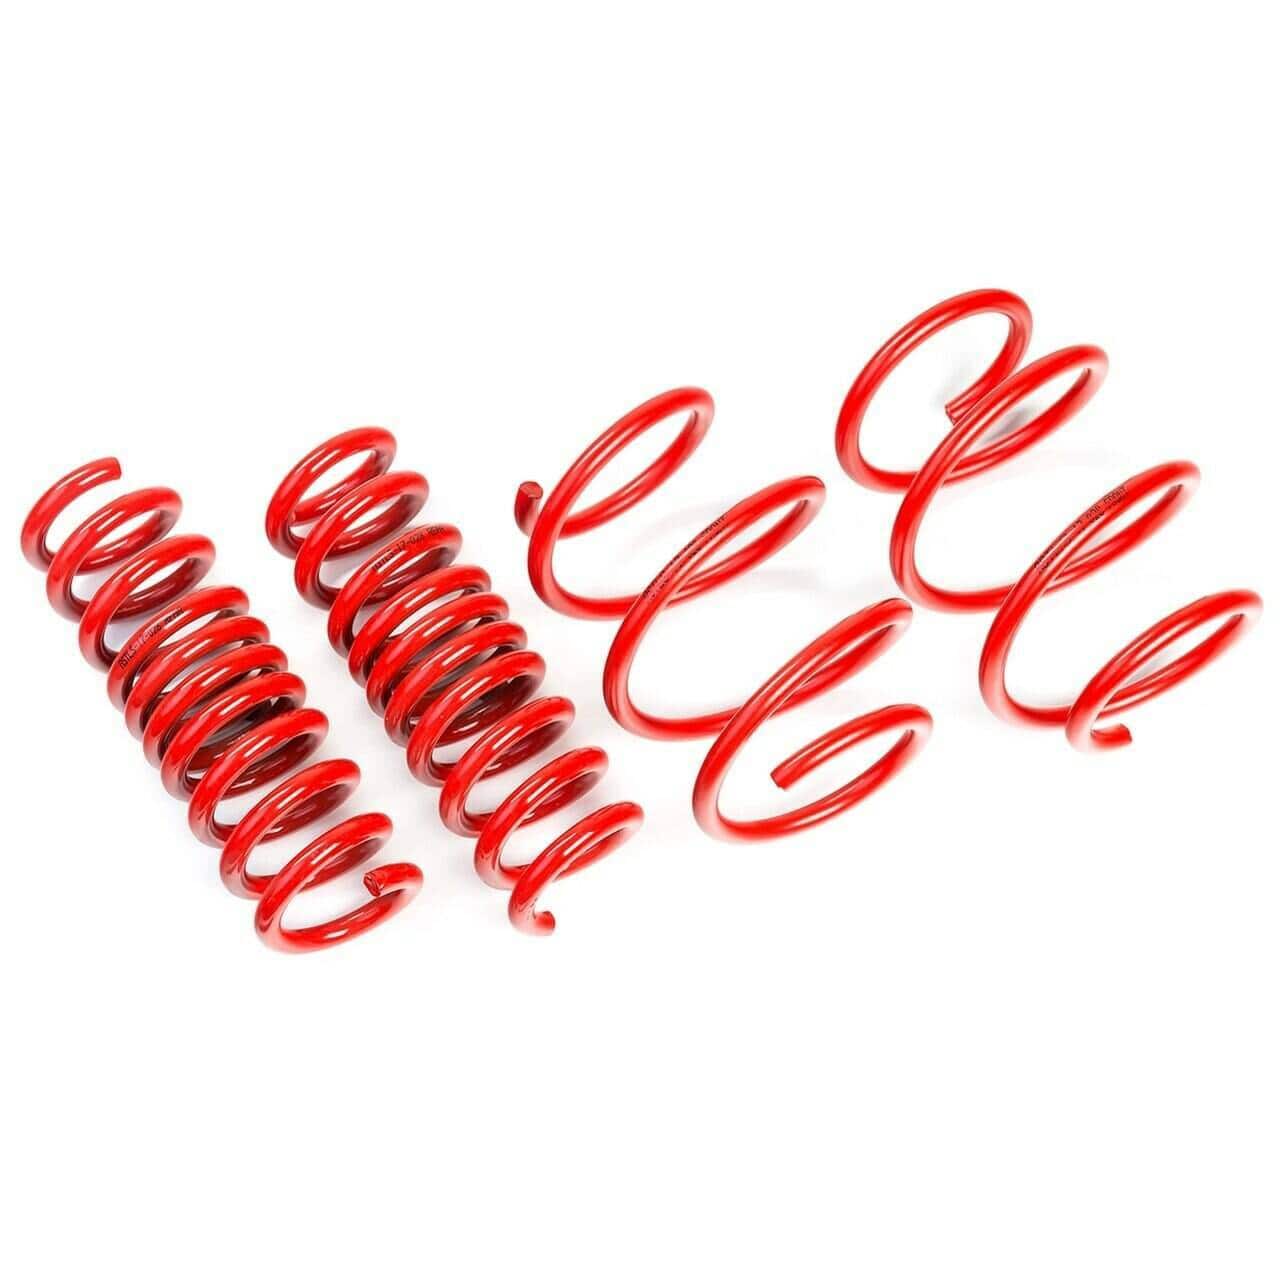 AST Suspension Lowering Springs (50MM/50MM) - 2004-2010 BMW 5 Series 535D/545i/550i Touring (E61) ASTLS-19-013